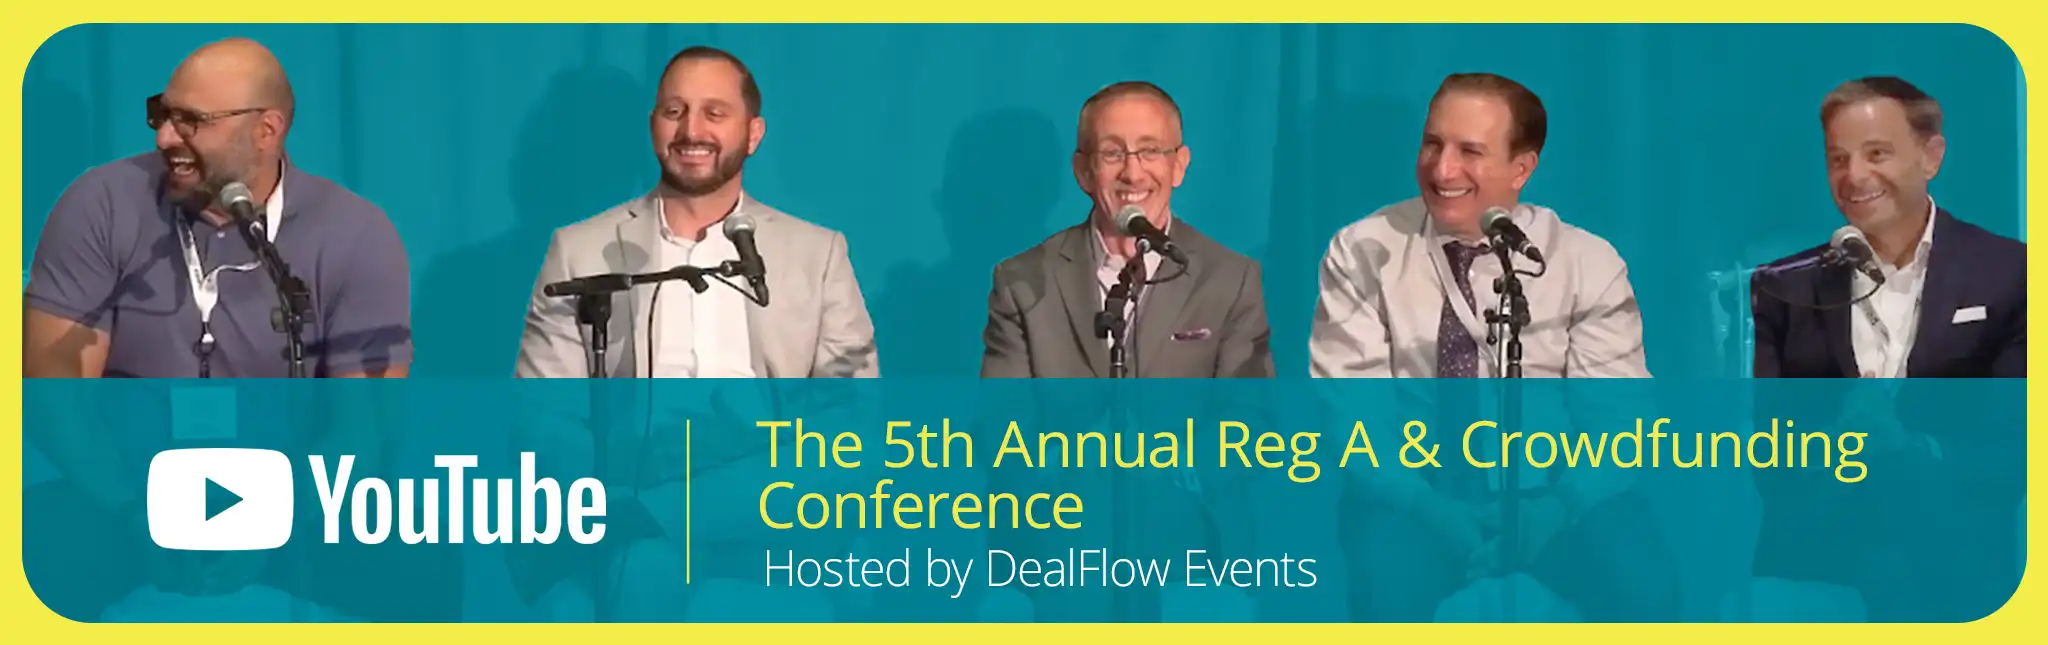 B2i Digital Featured Conference_5th Ann Reg A & Crowdfunding Con_DealFlow Events